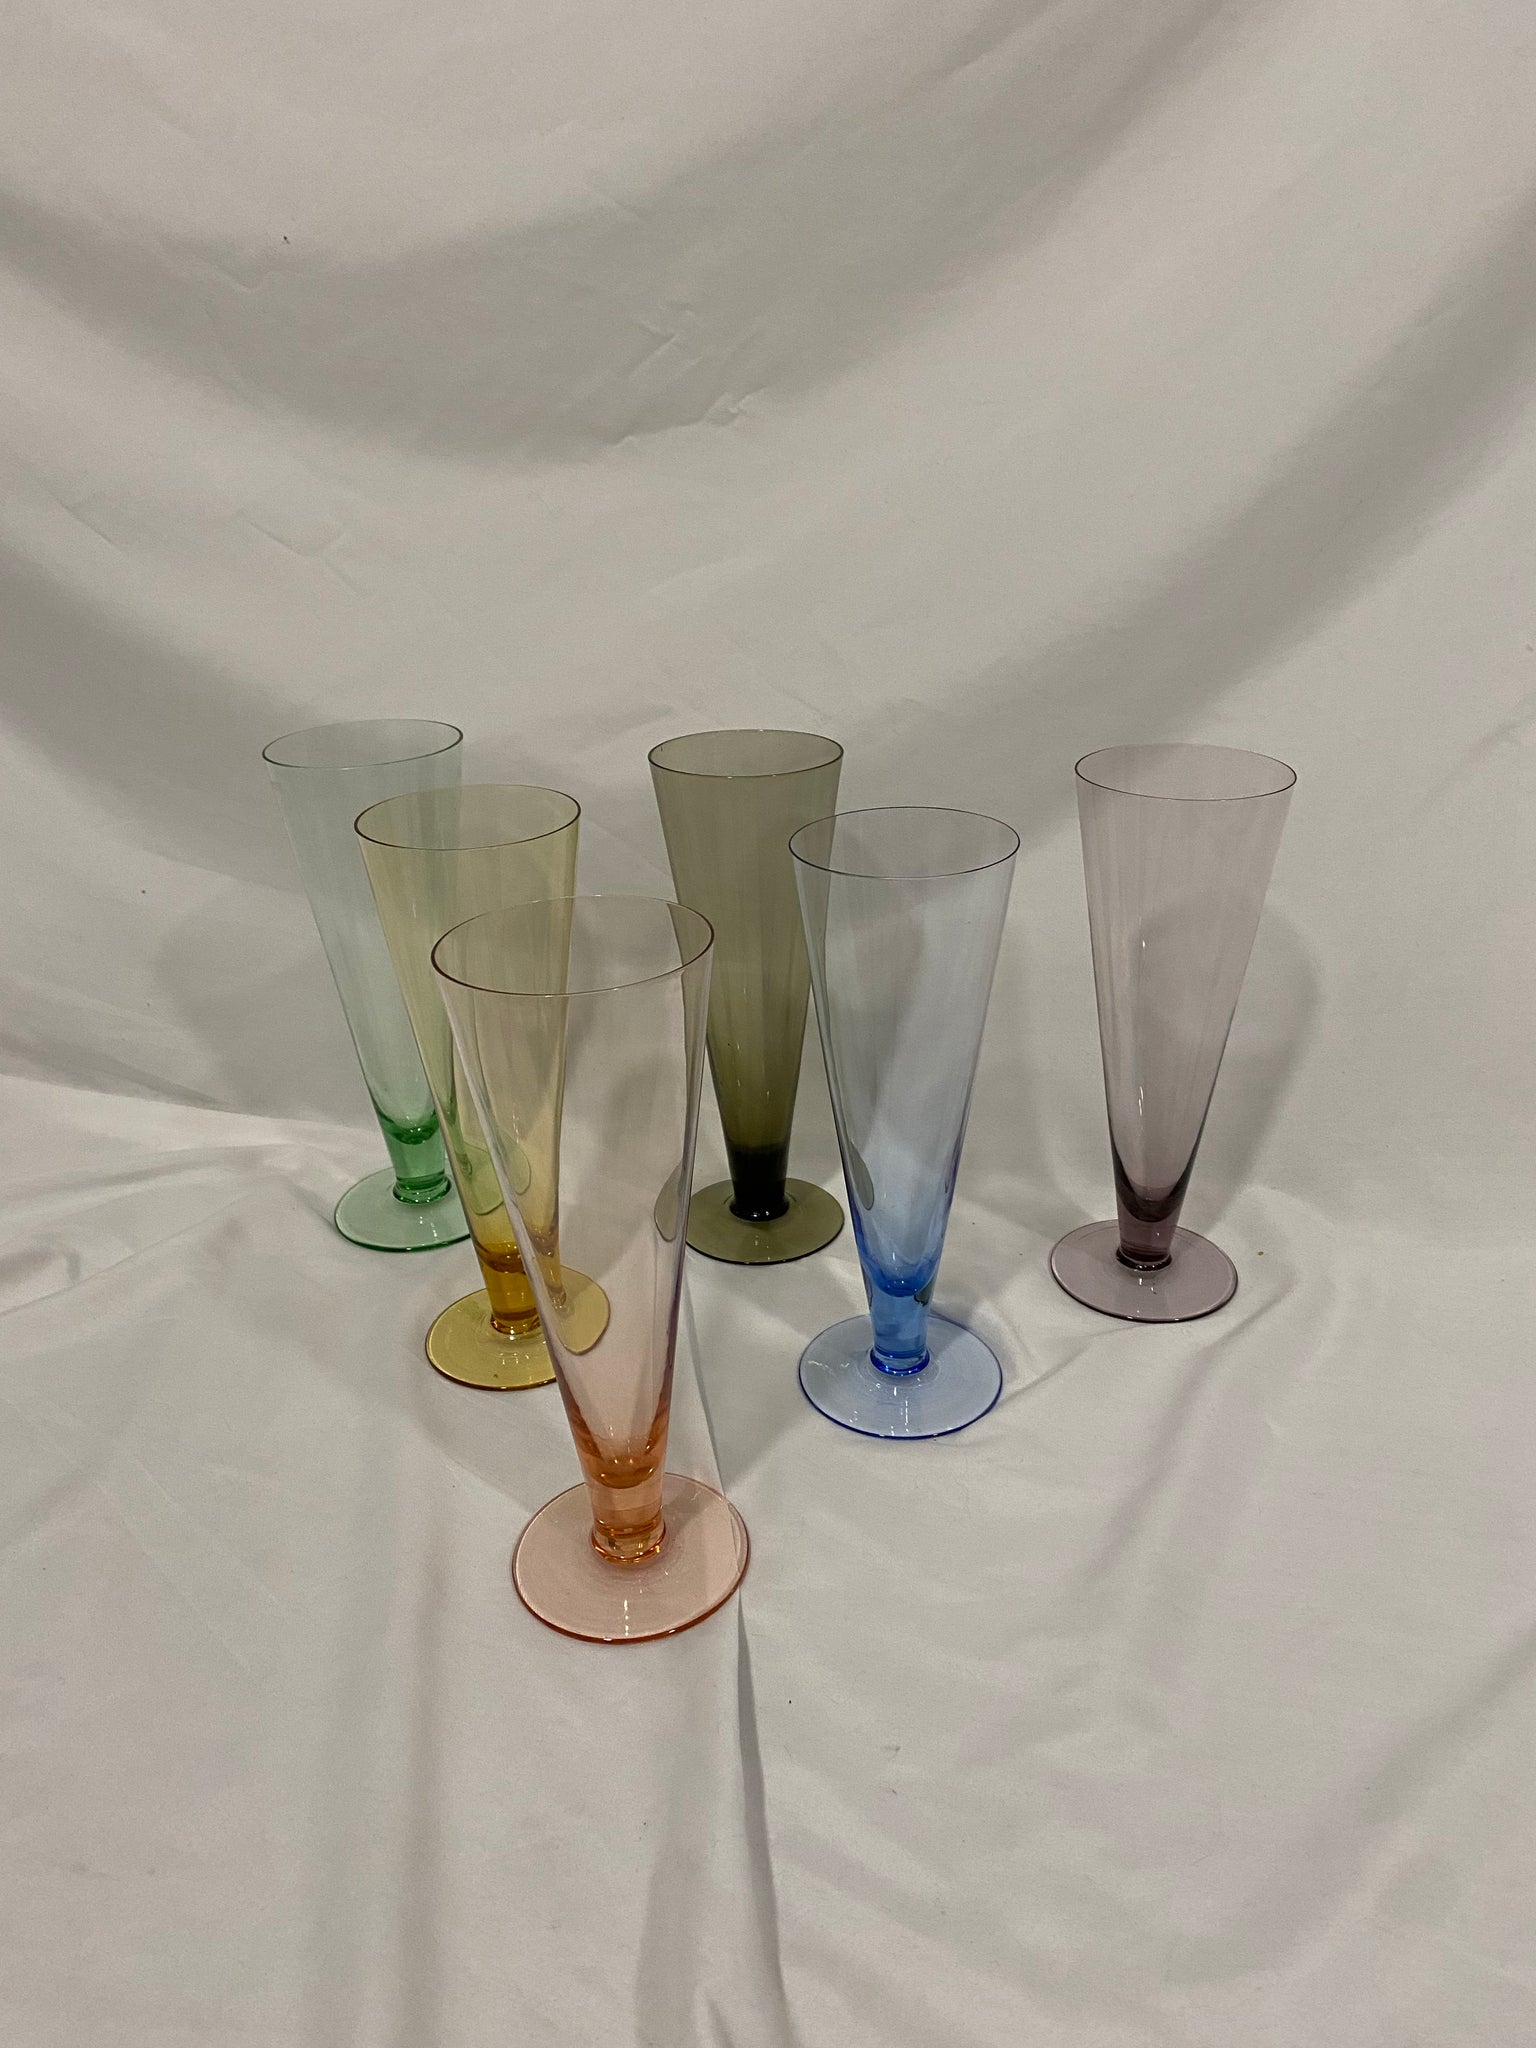 Rainbow of tall colorful glasses